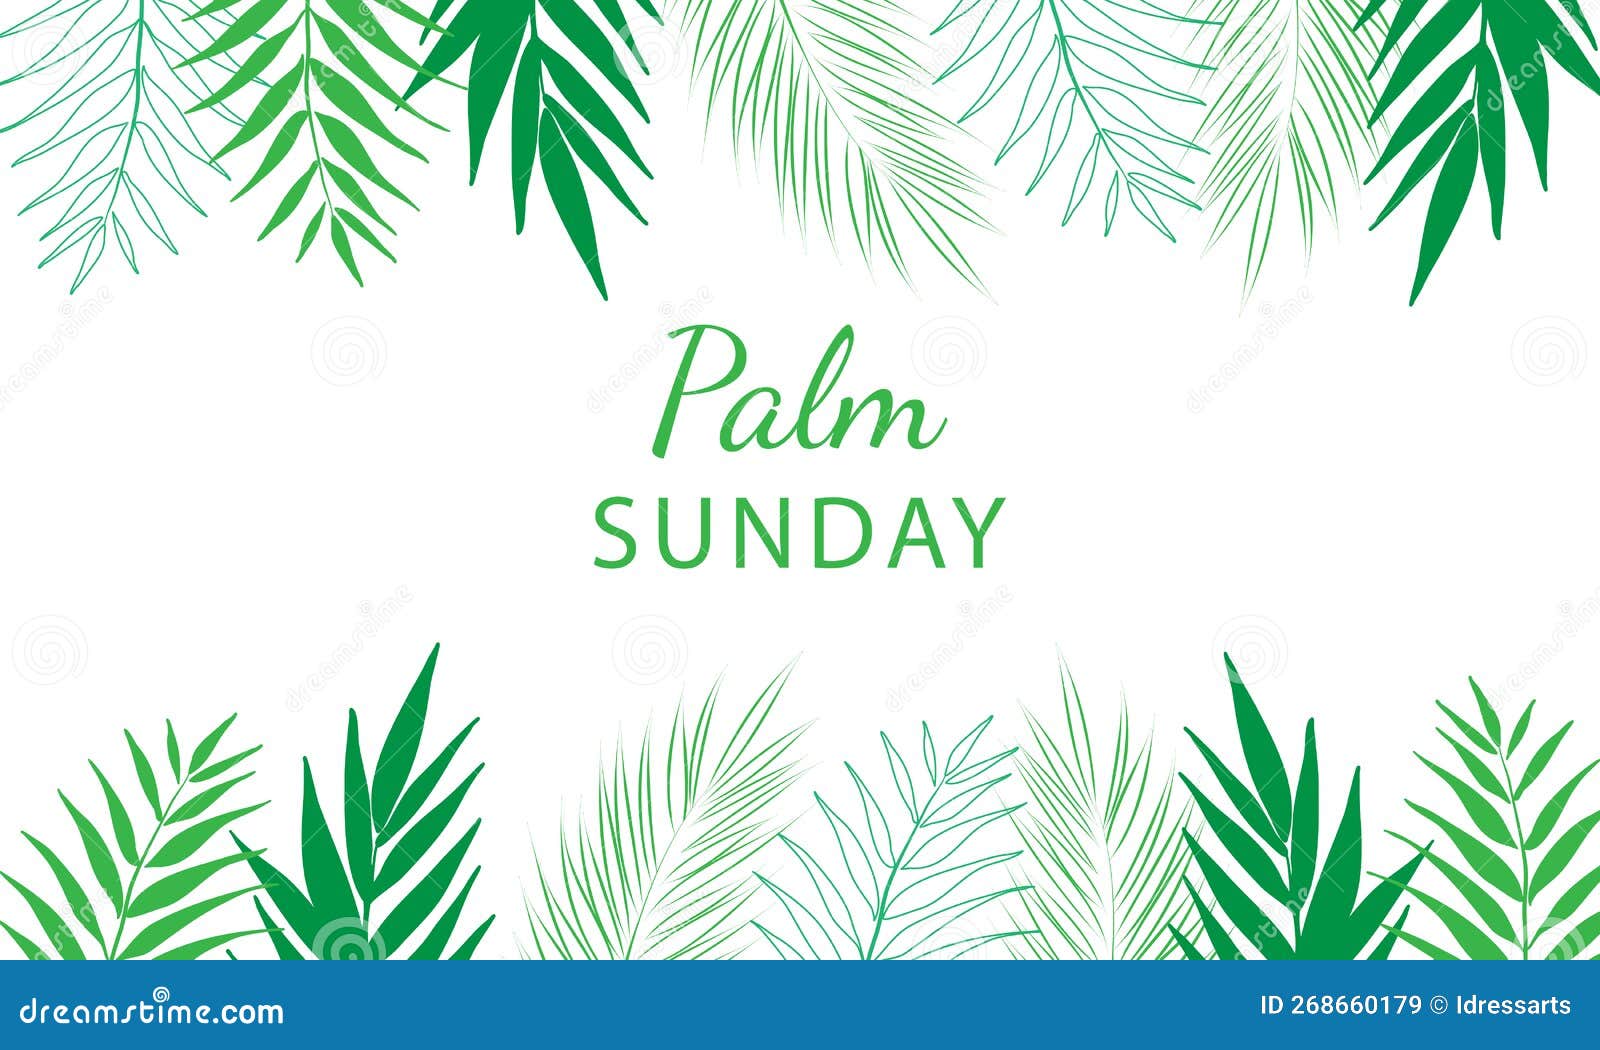 Palm Sunday - Greeting Banner Template for Christian Holiday, with Palm ...